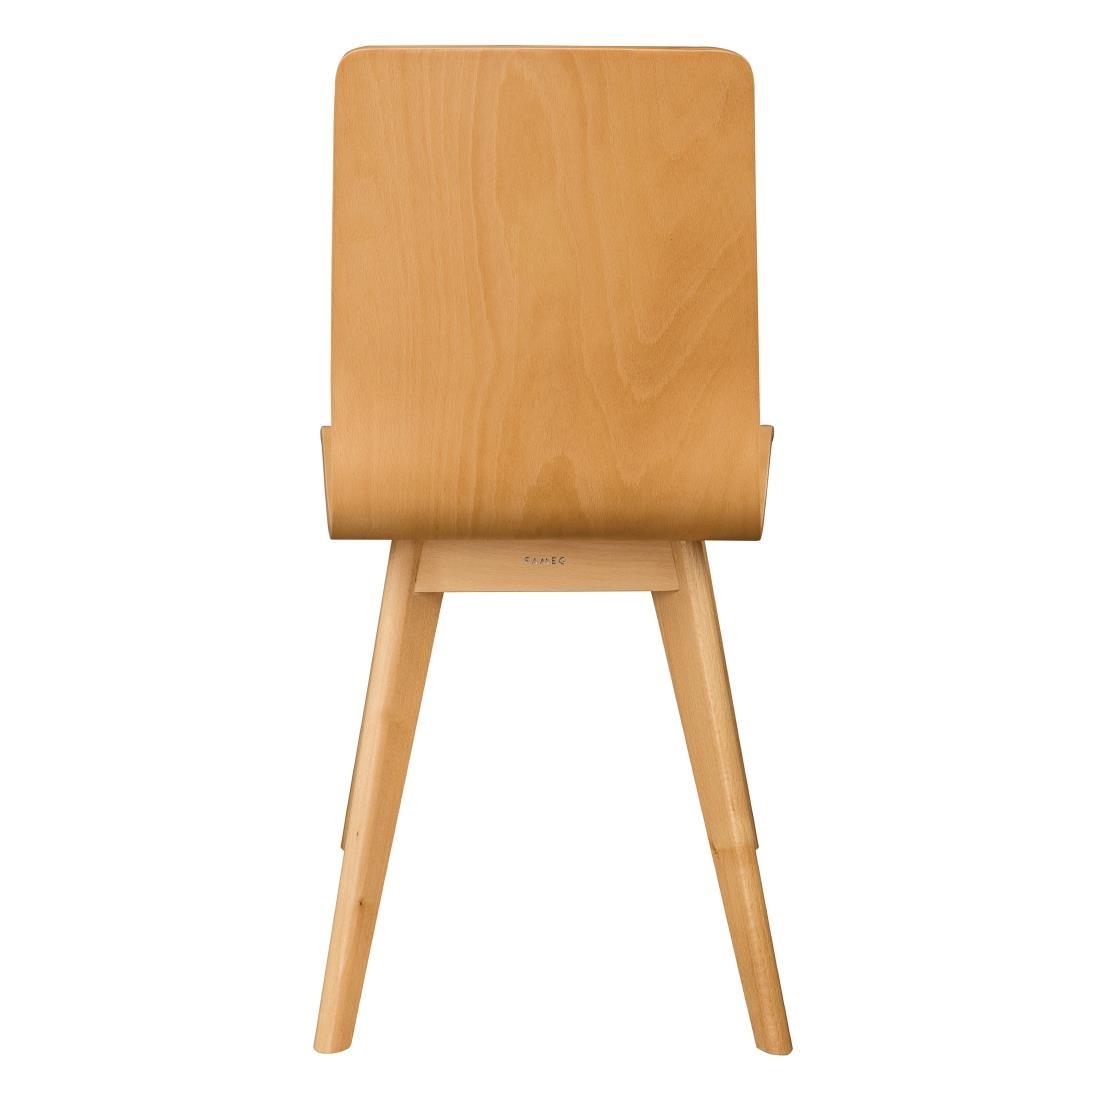 Fameg Wooden Flow Bentwood Beech Side Chairs (Pack of 2) - CW010  - 3